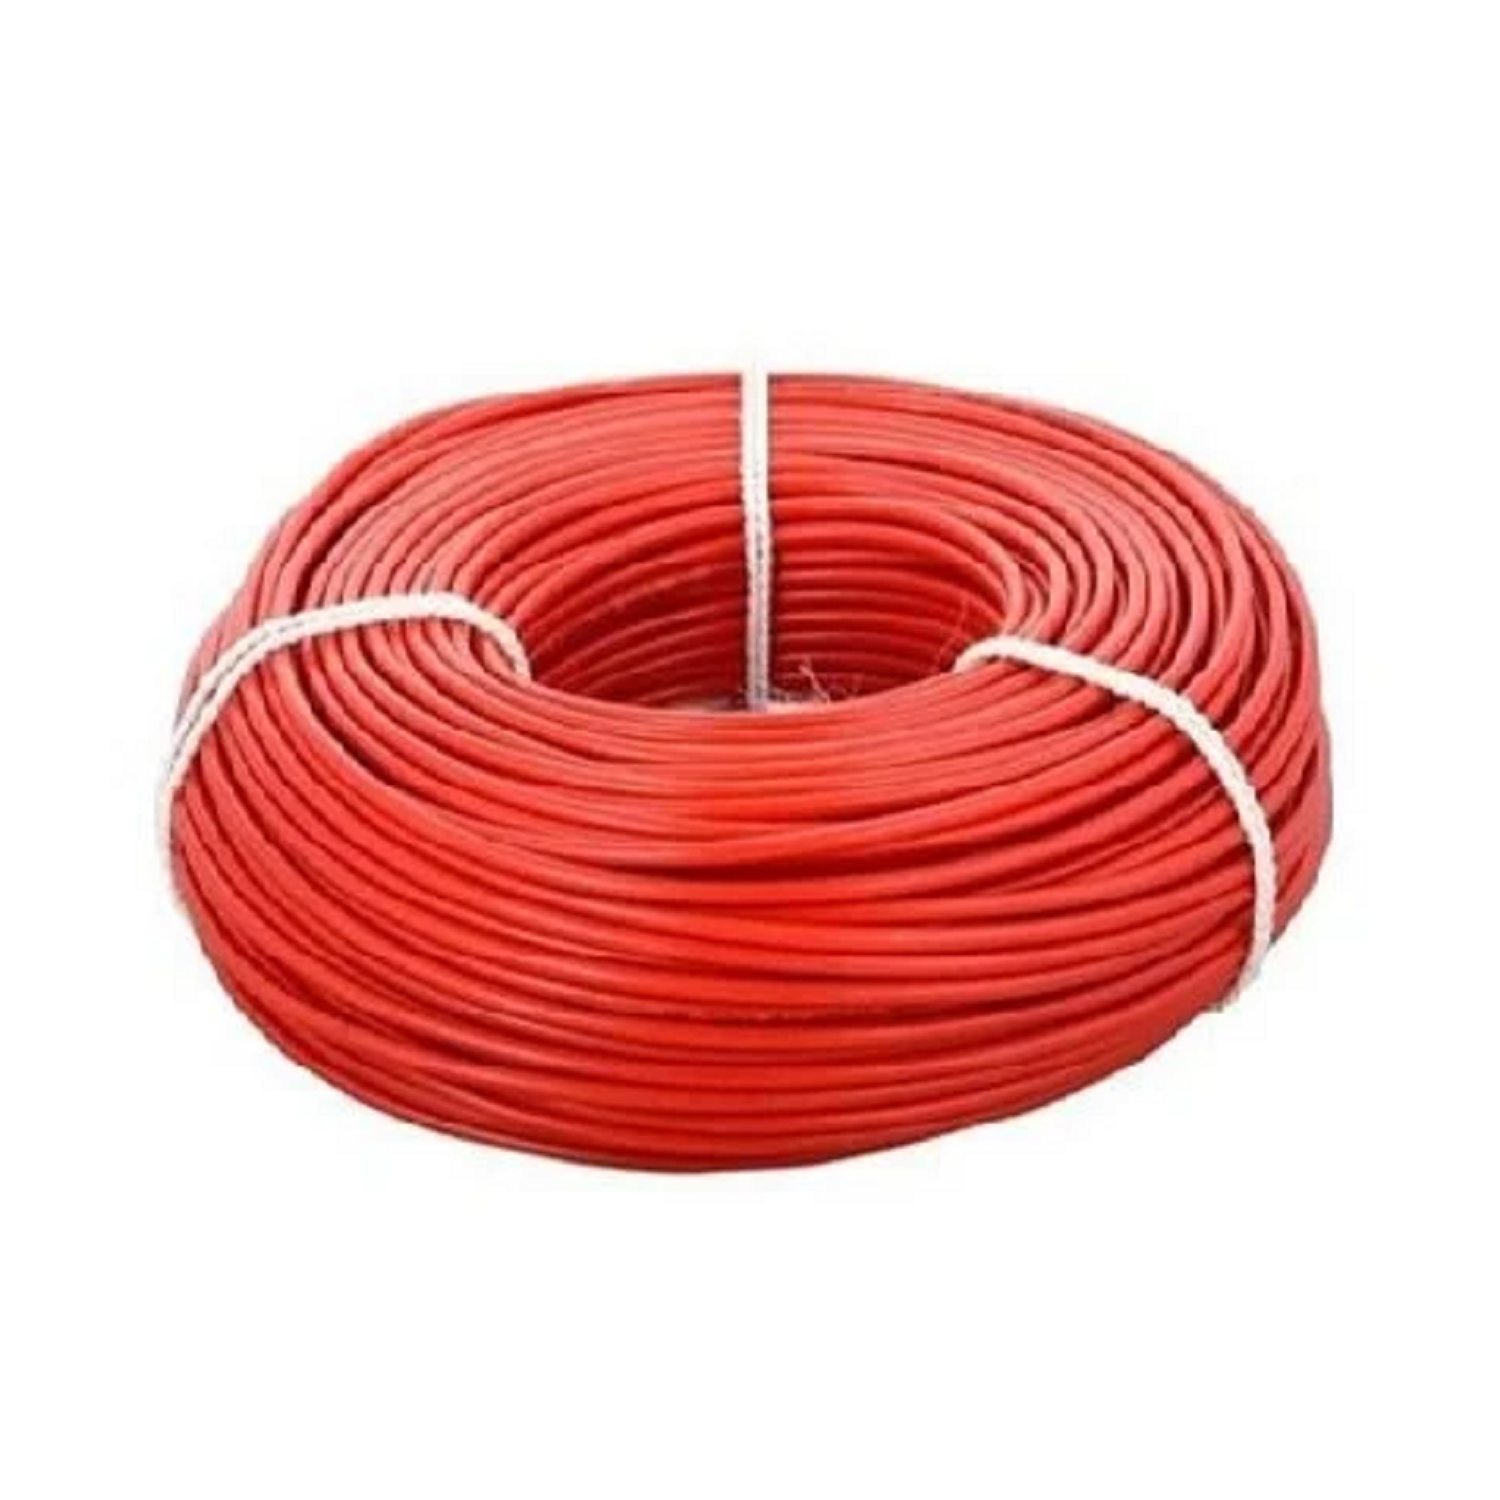 1.5 Sqmm RR FR Single Core Copper Wire (180 Mtr) With PVC Insulated for Domestic 38 Industrial Uses 